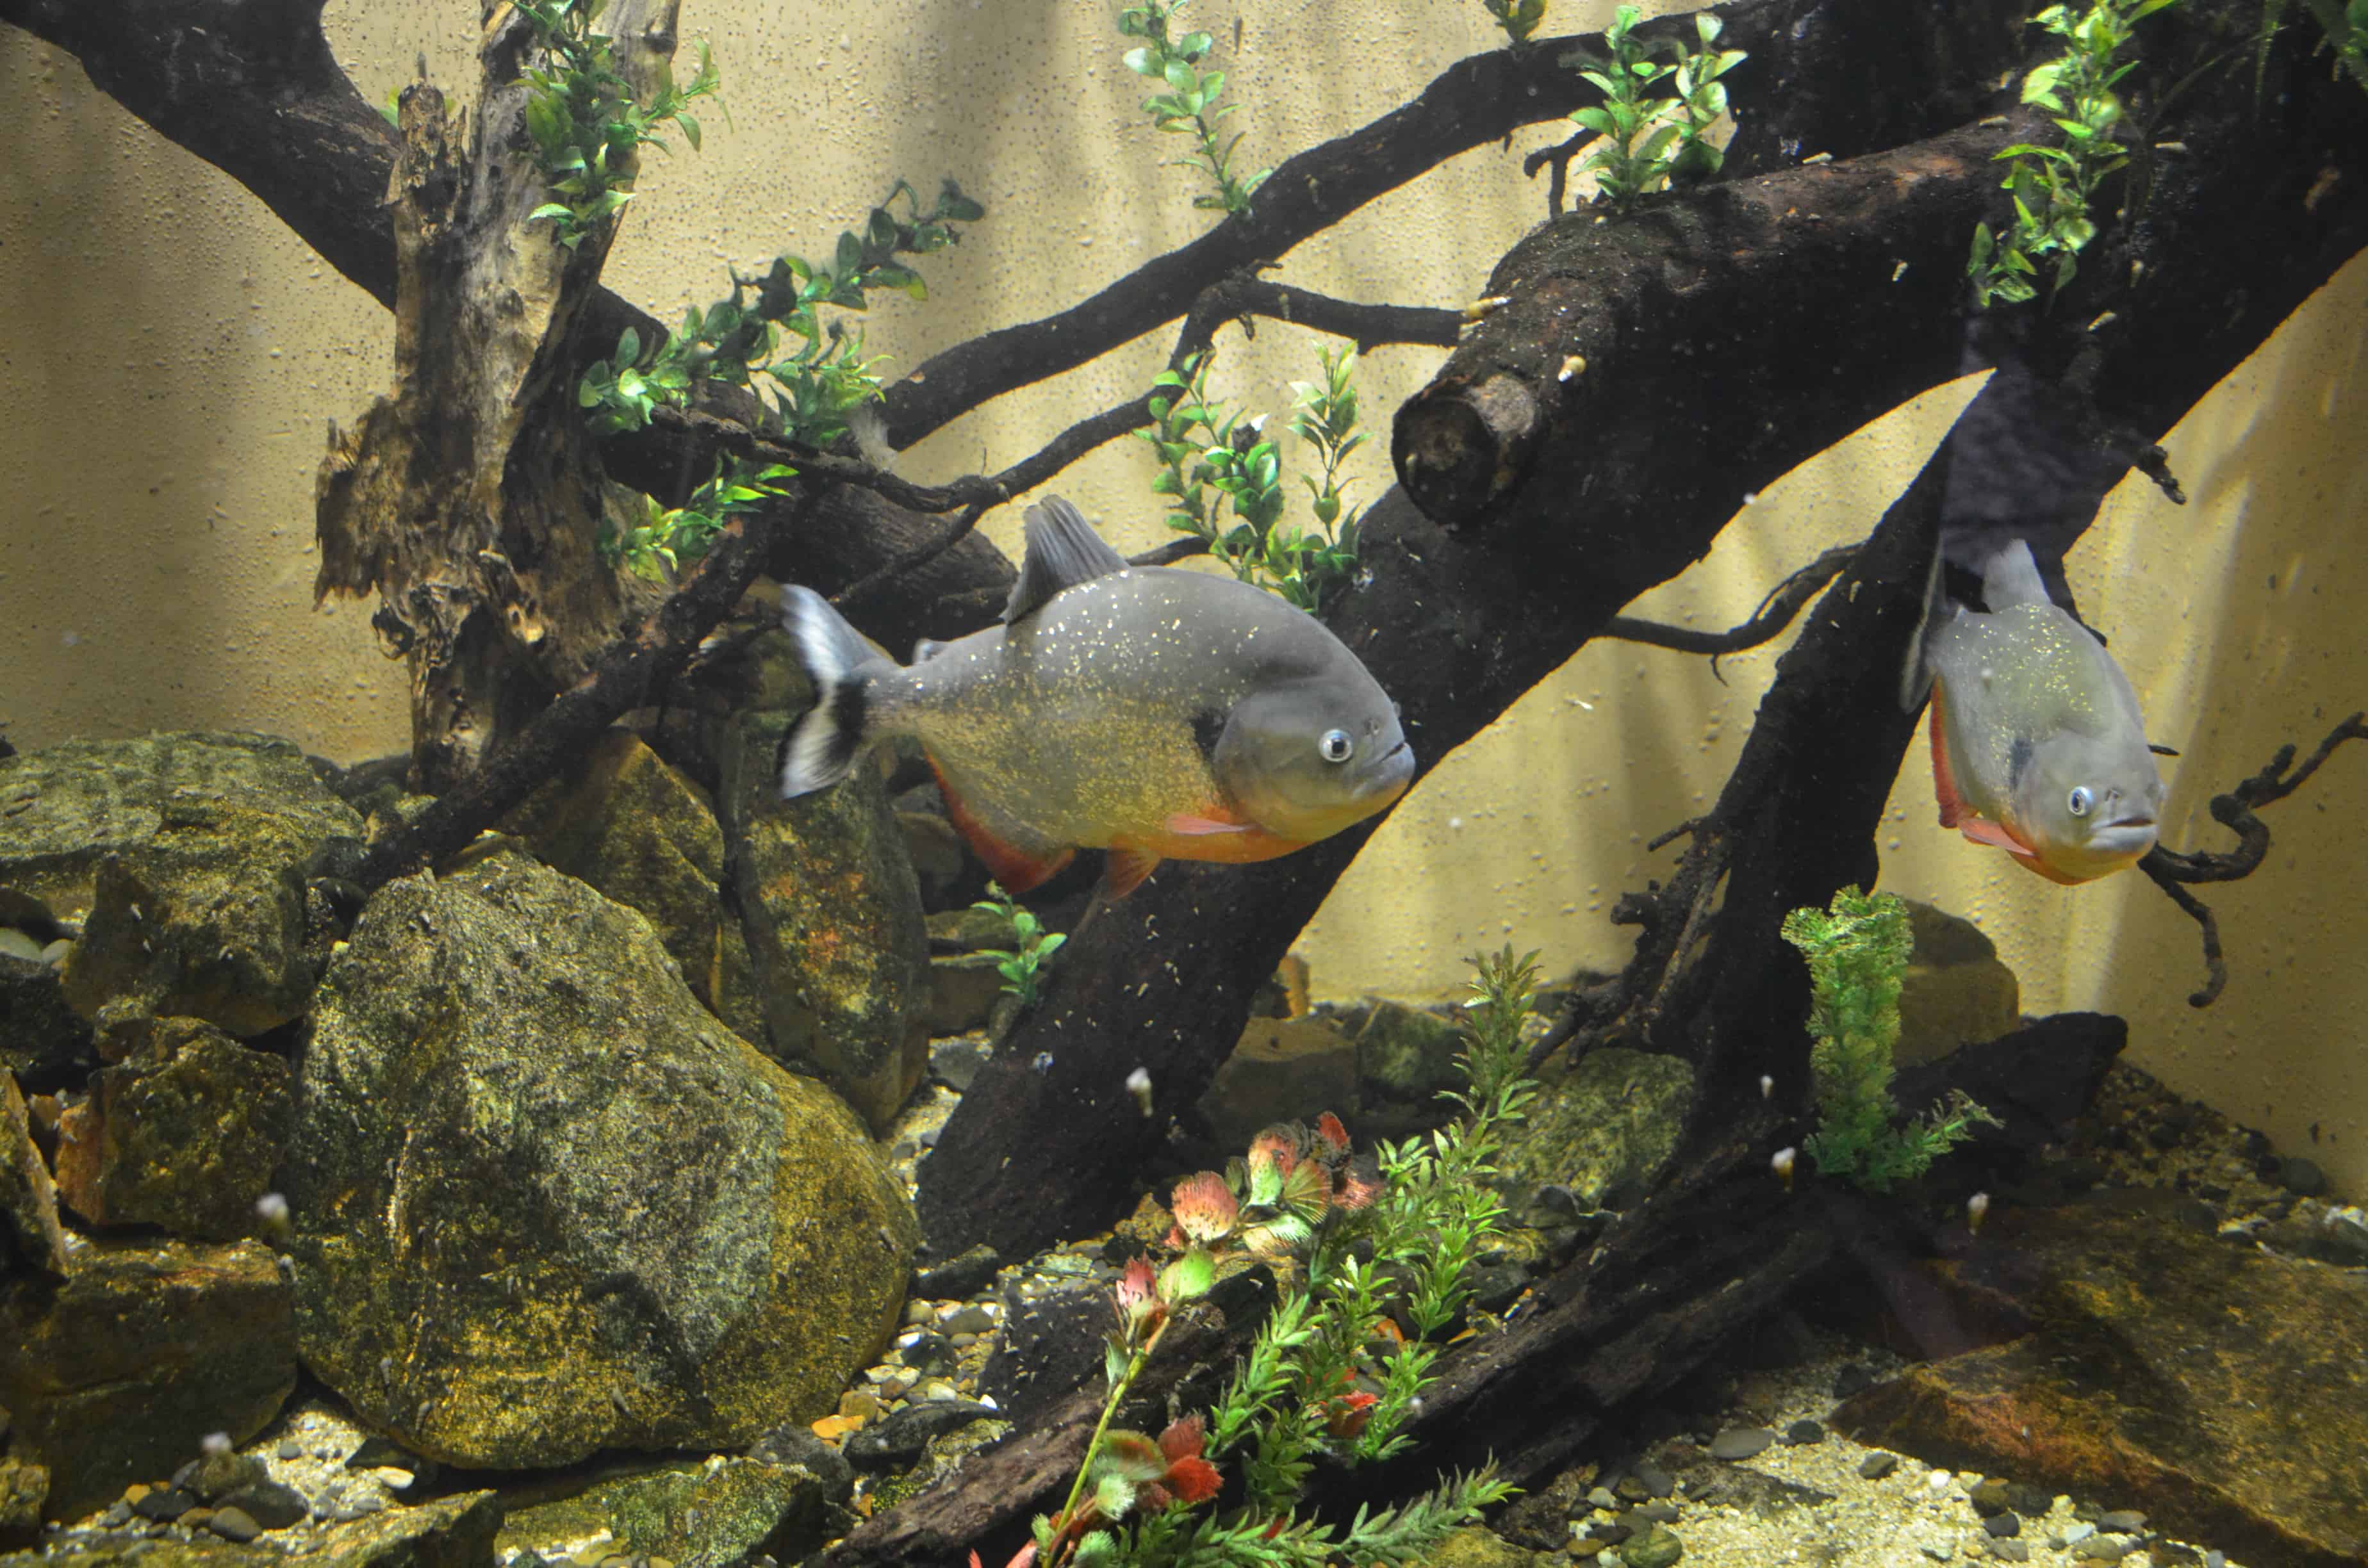 Piranhas at the Cali Zoo in Colombia